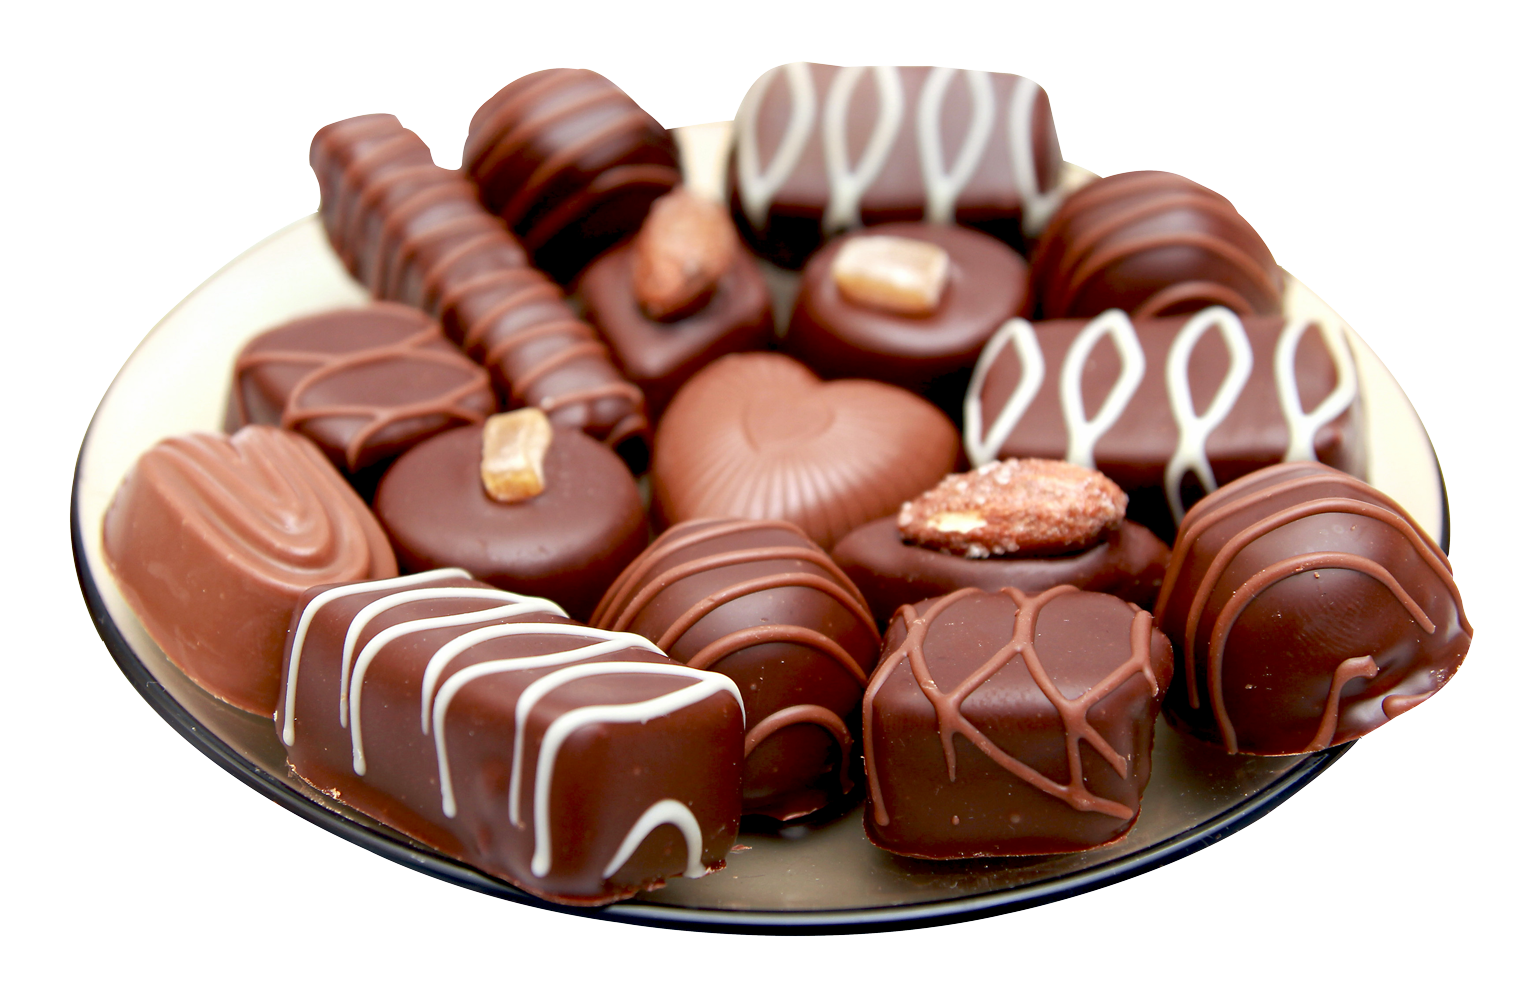 Chocolates in a Plate